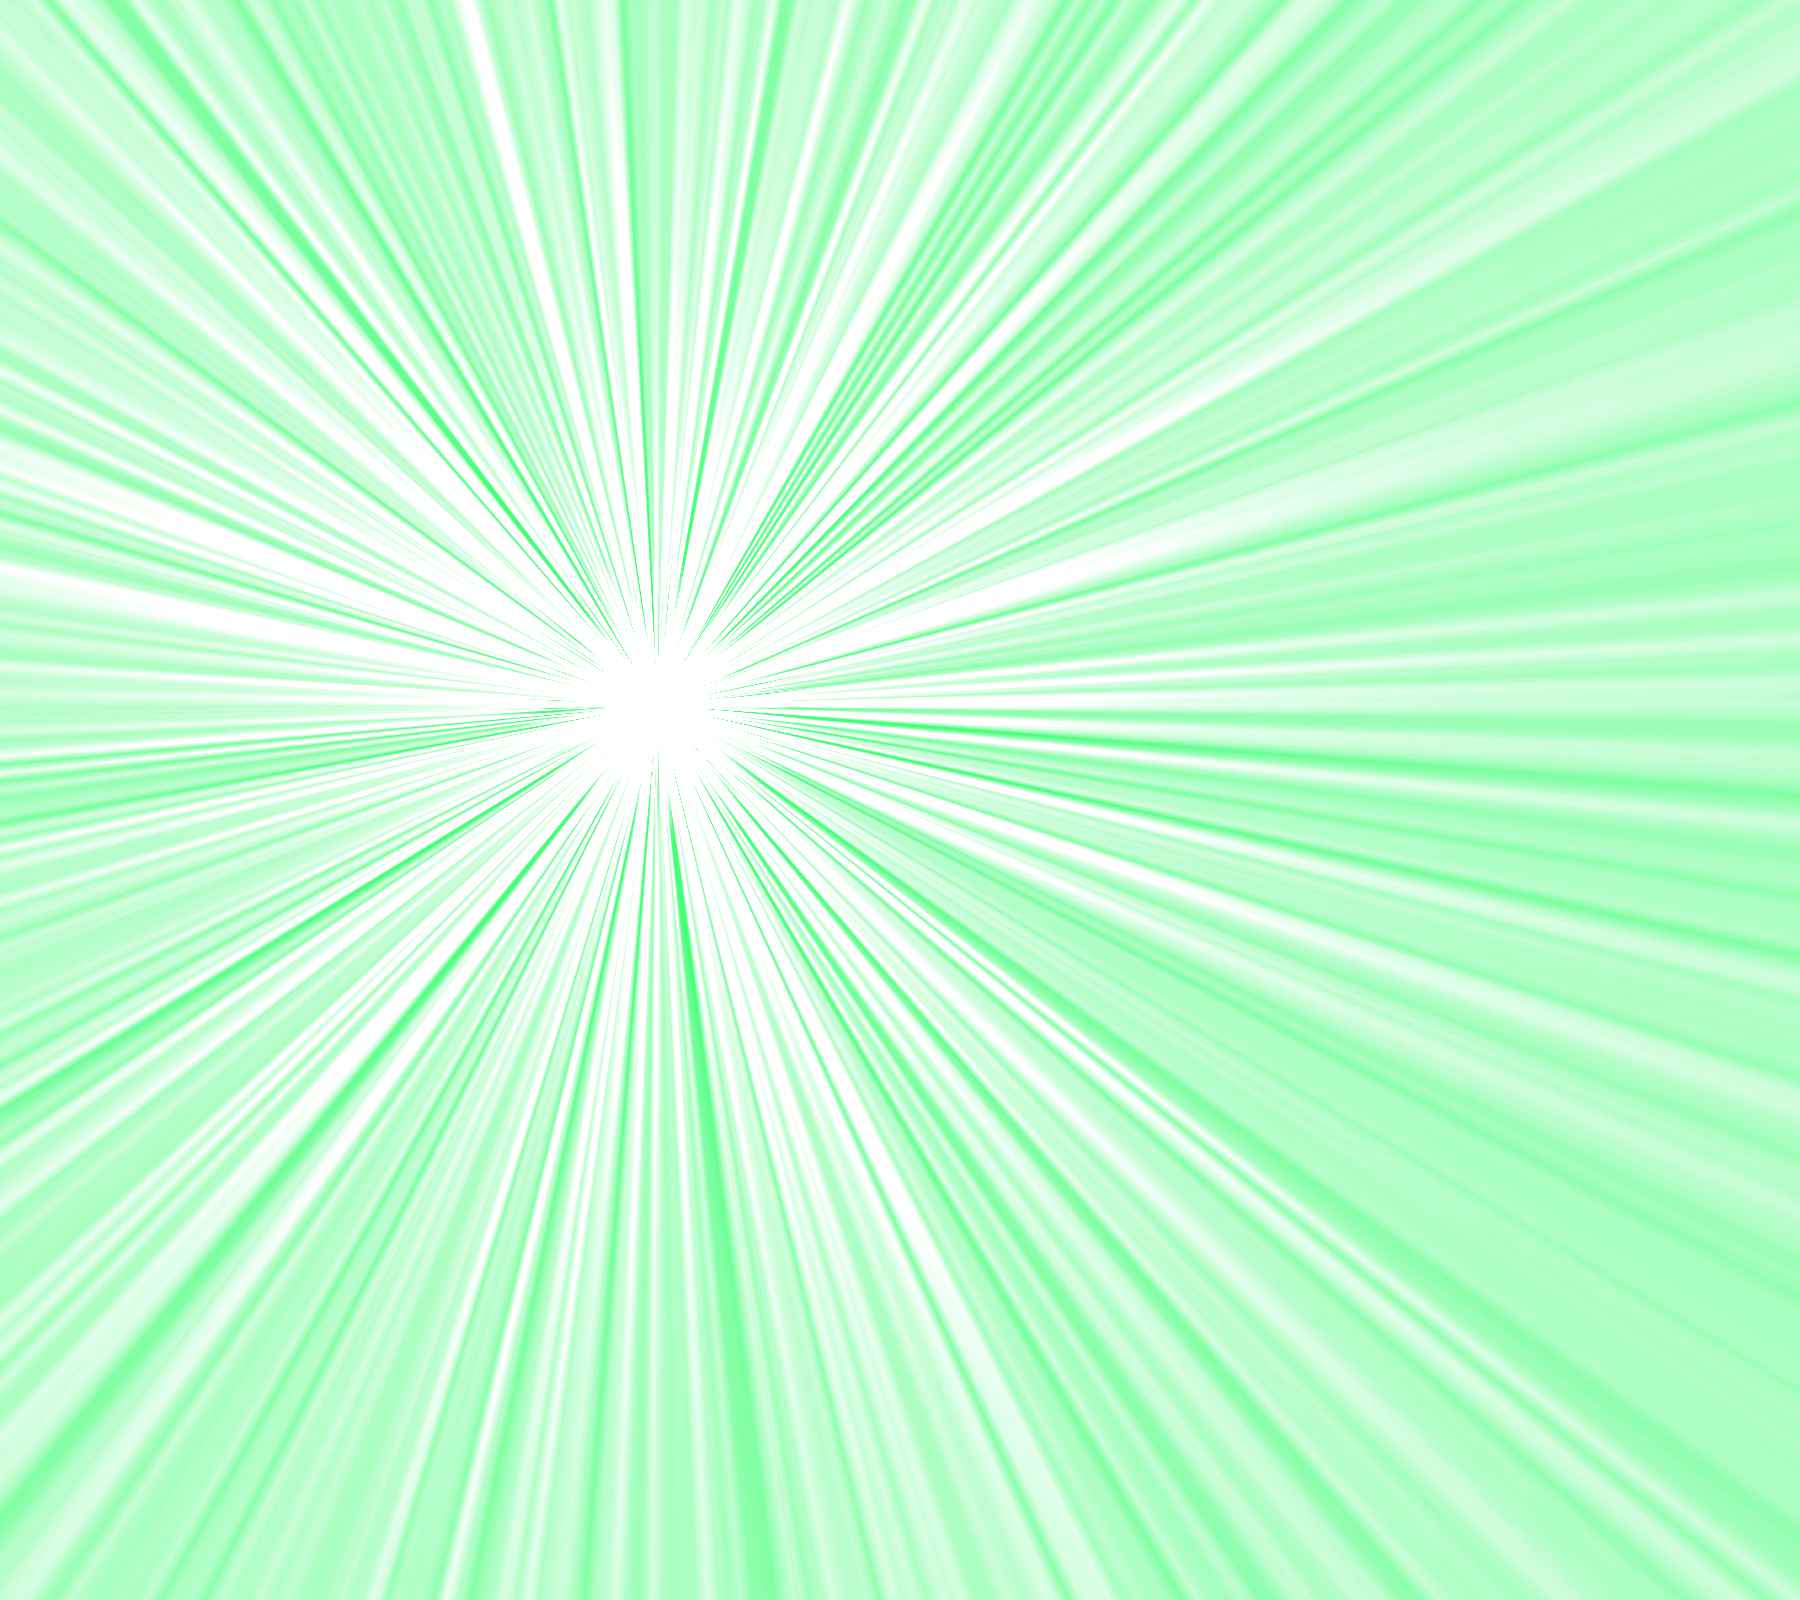 Light Green Background Designs Images Pictures   Becuo